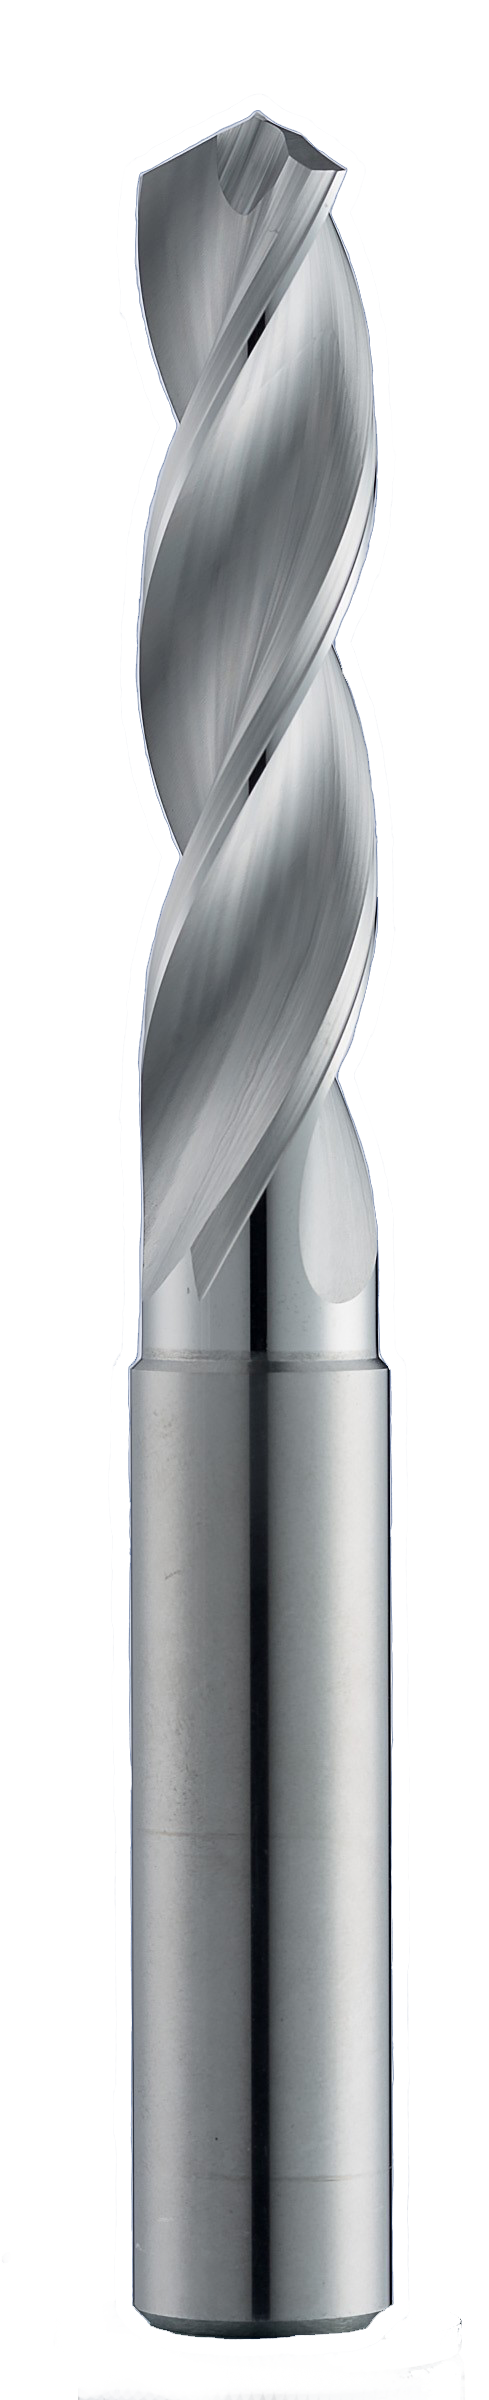 11.40mm Dia, 124 Degree Point, Solid Carbide Drill - 67684